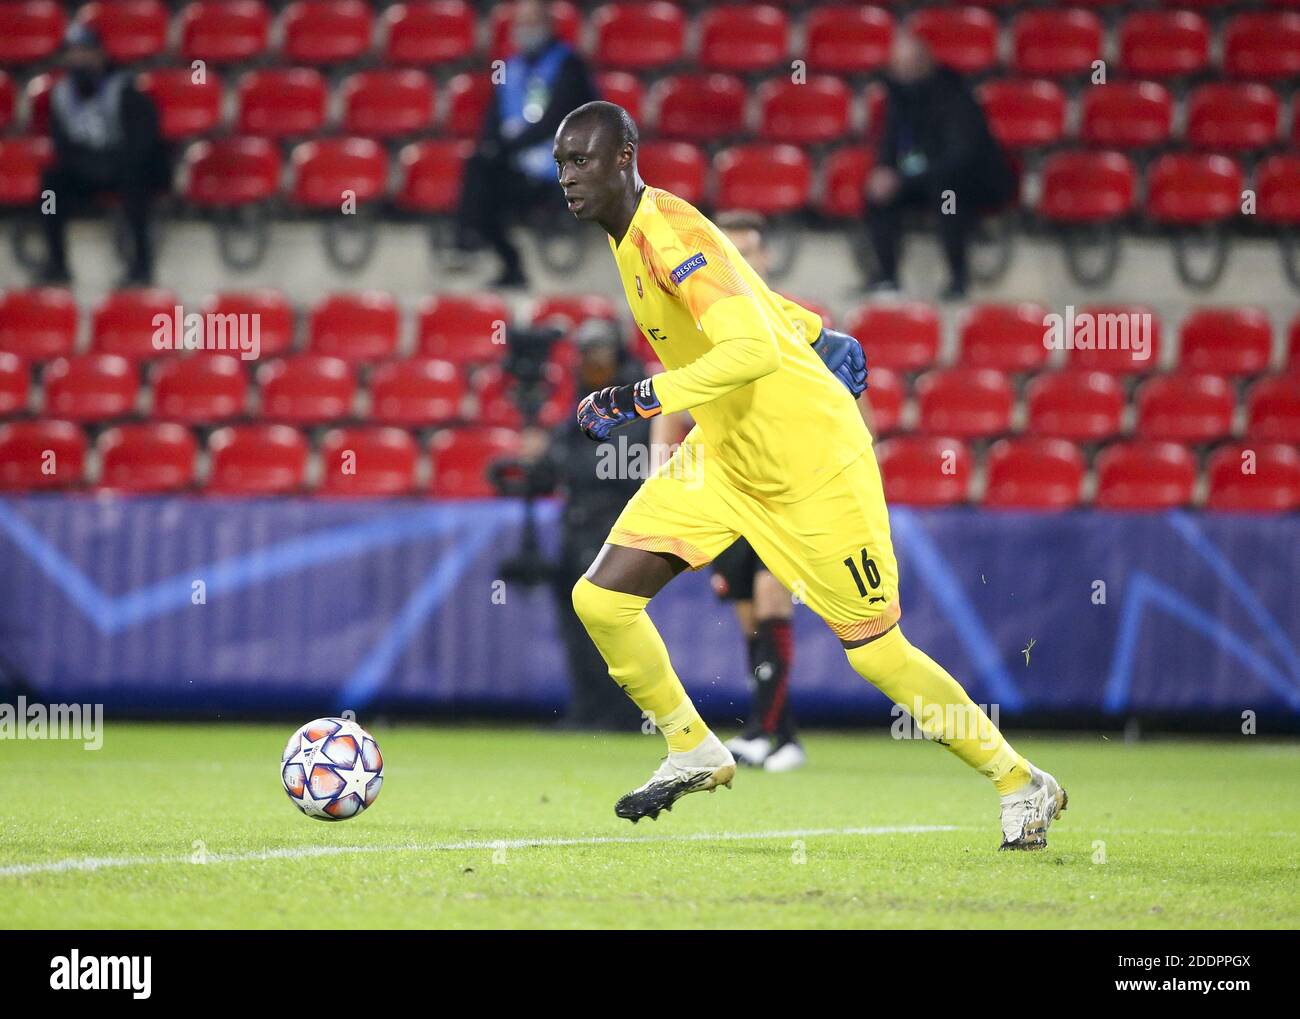 Goalkeeper of Stade Rennais Alfred Gomis during the UEFA Champions League, Group E football match between Stade Rennais and Chel / LM Stock Photo